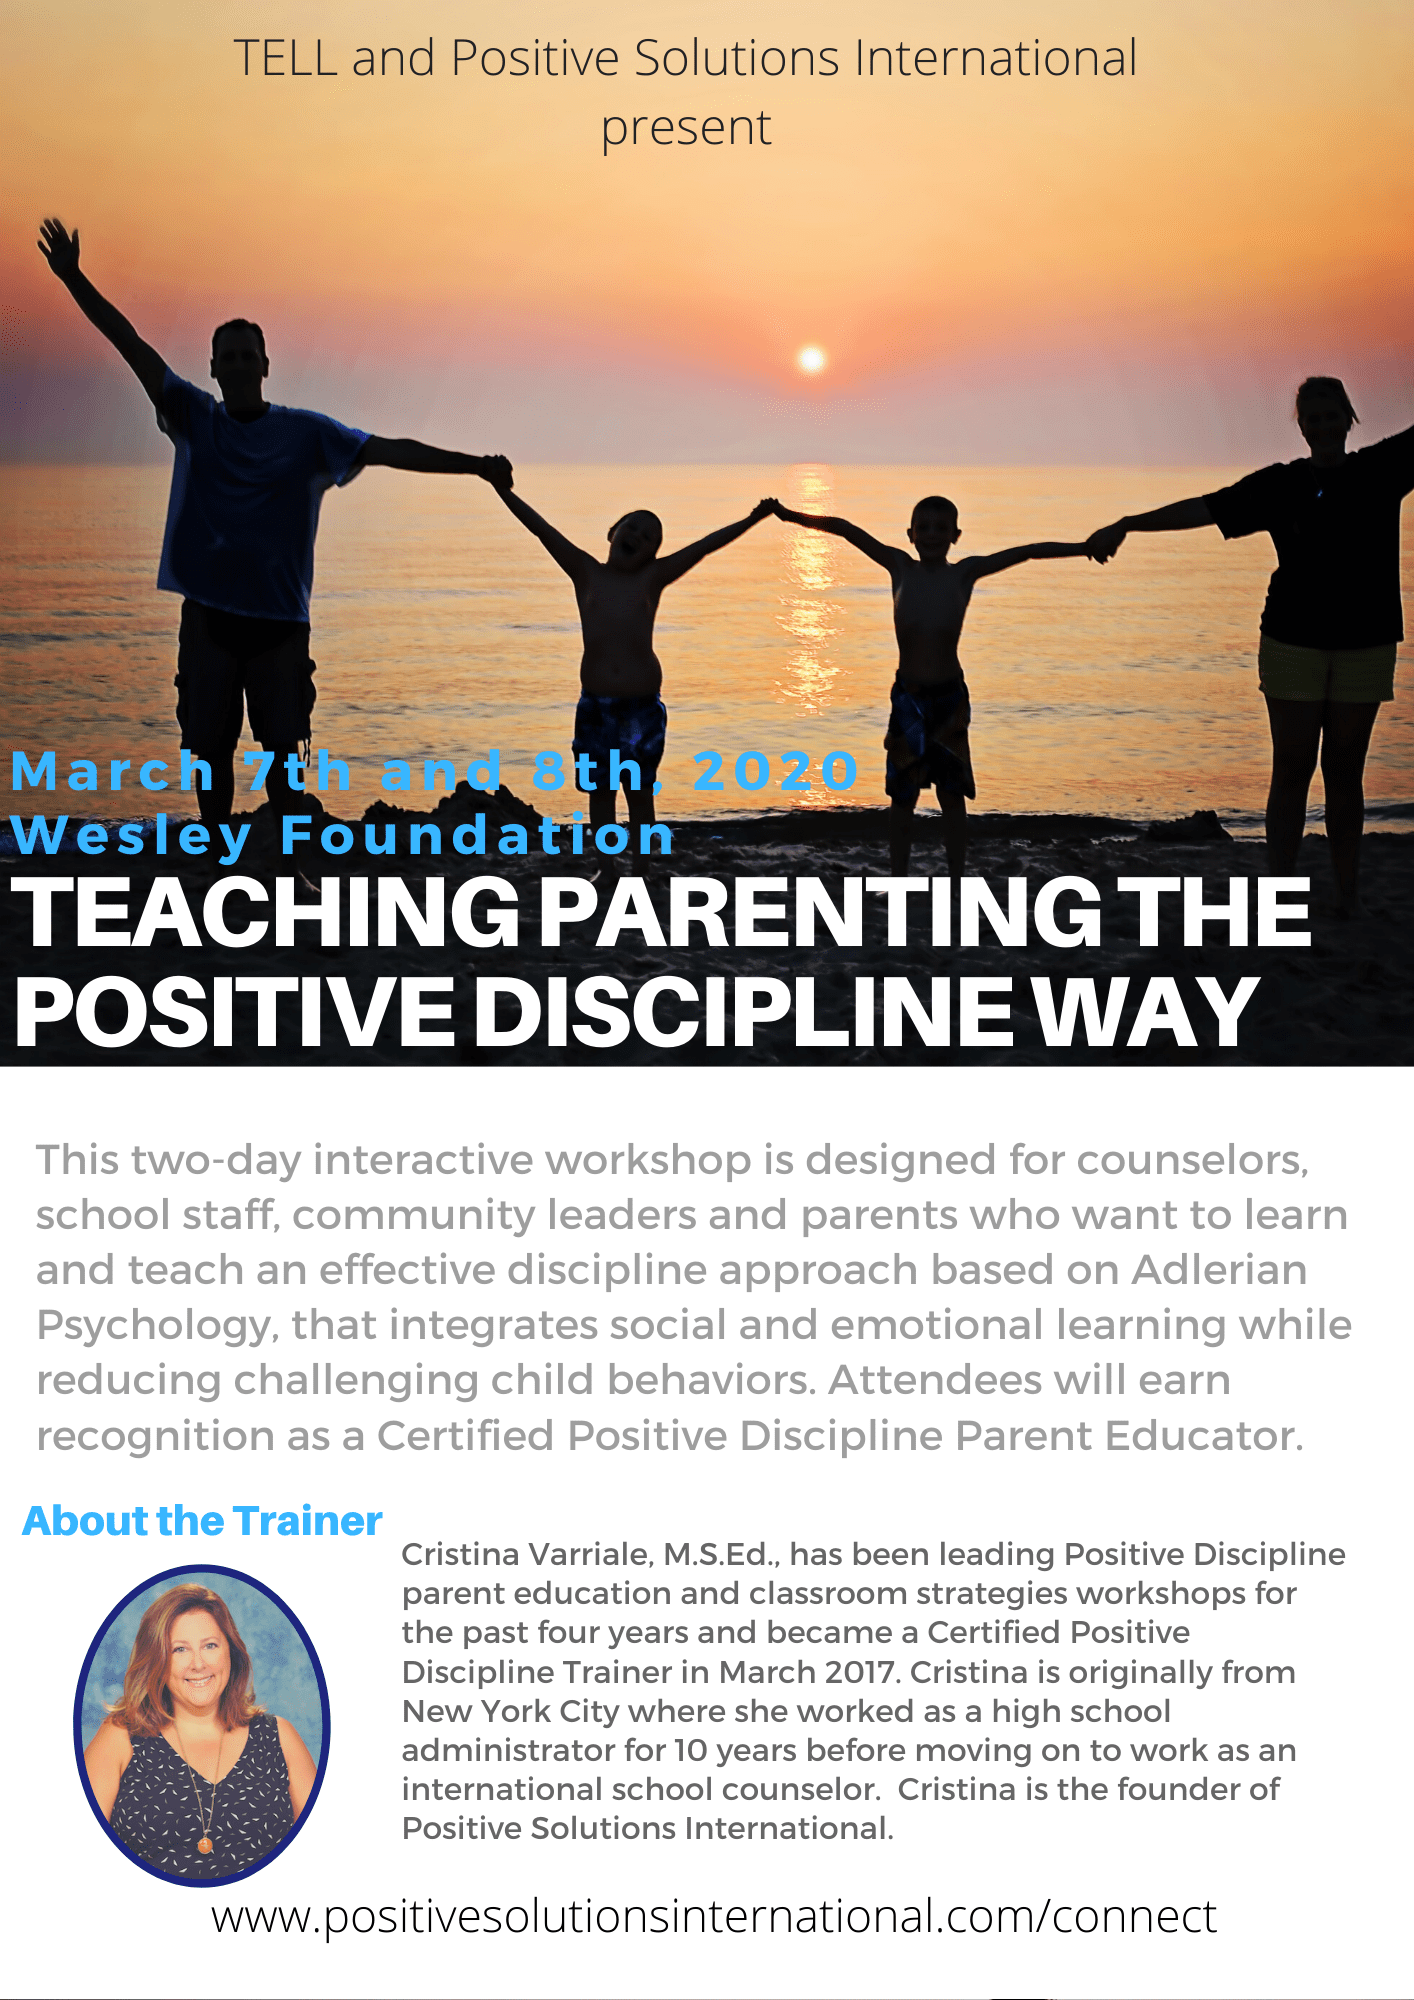 Empowering with Positivity: Effective Discipline in Parenting